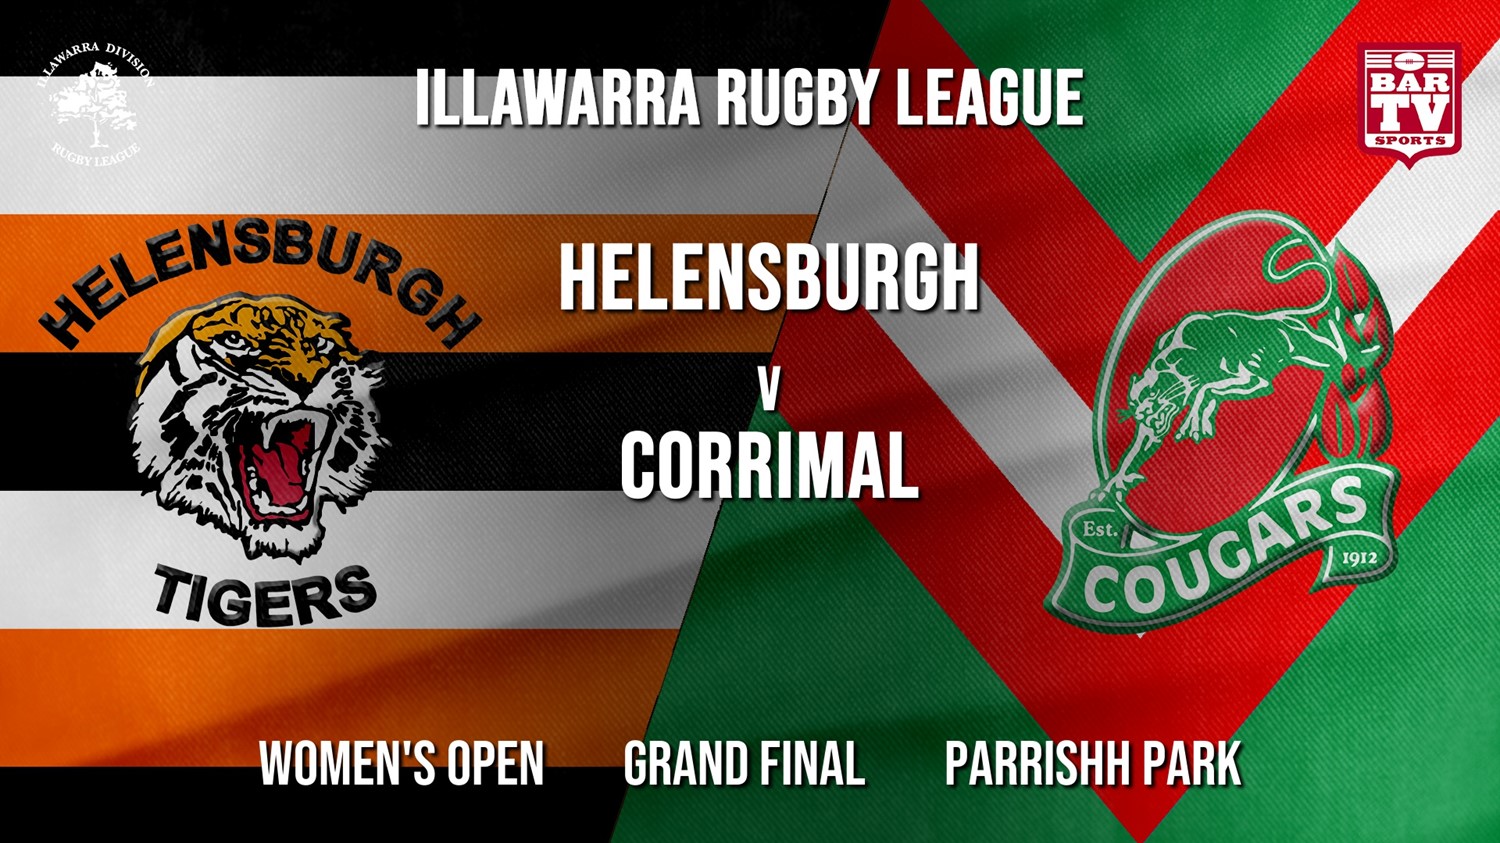 IRL Grand Final - Women's Open - Helensburgh Tigers v Corrimal Cougars Minigame Slate Image